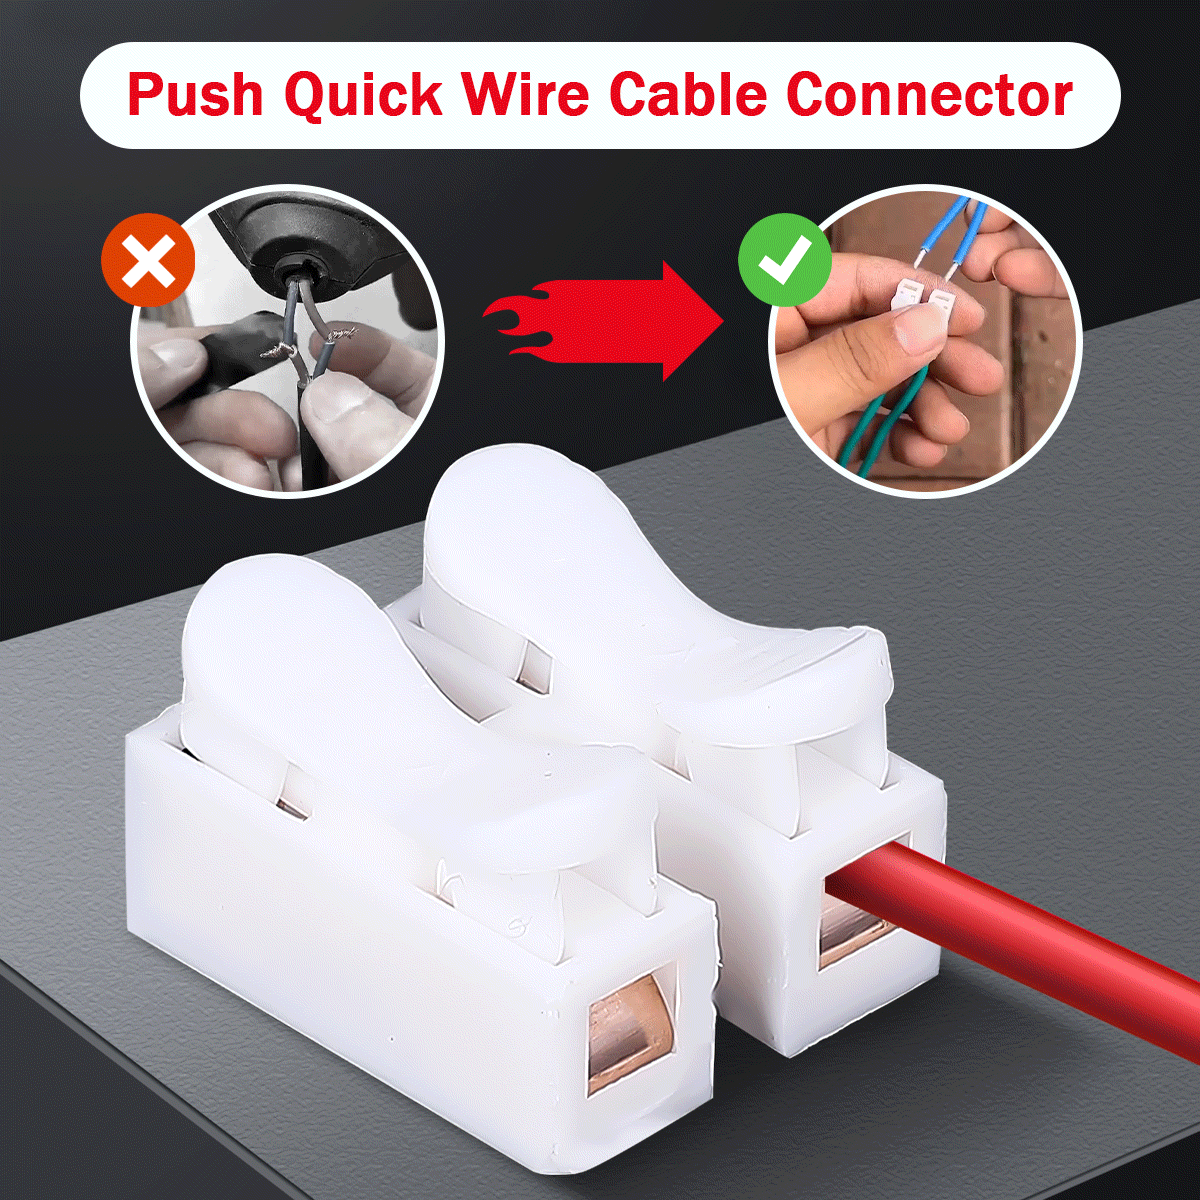 Push Quick Wire Cable Connector